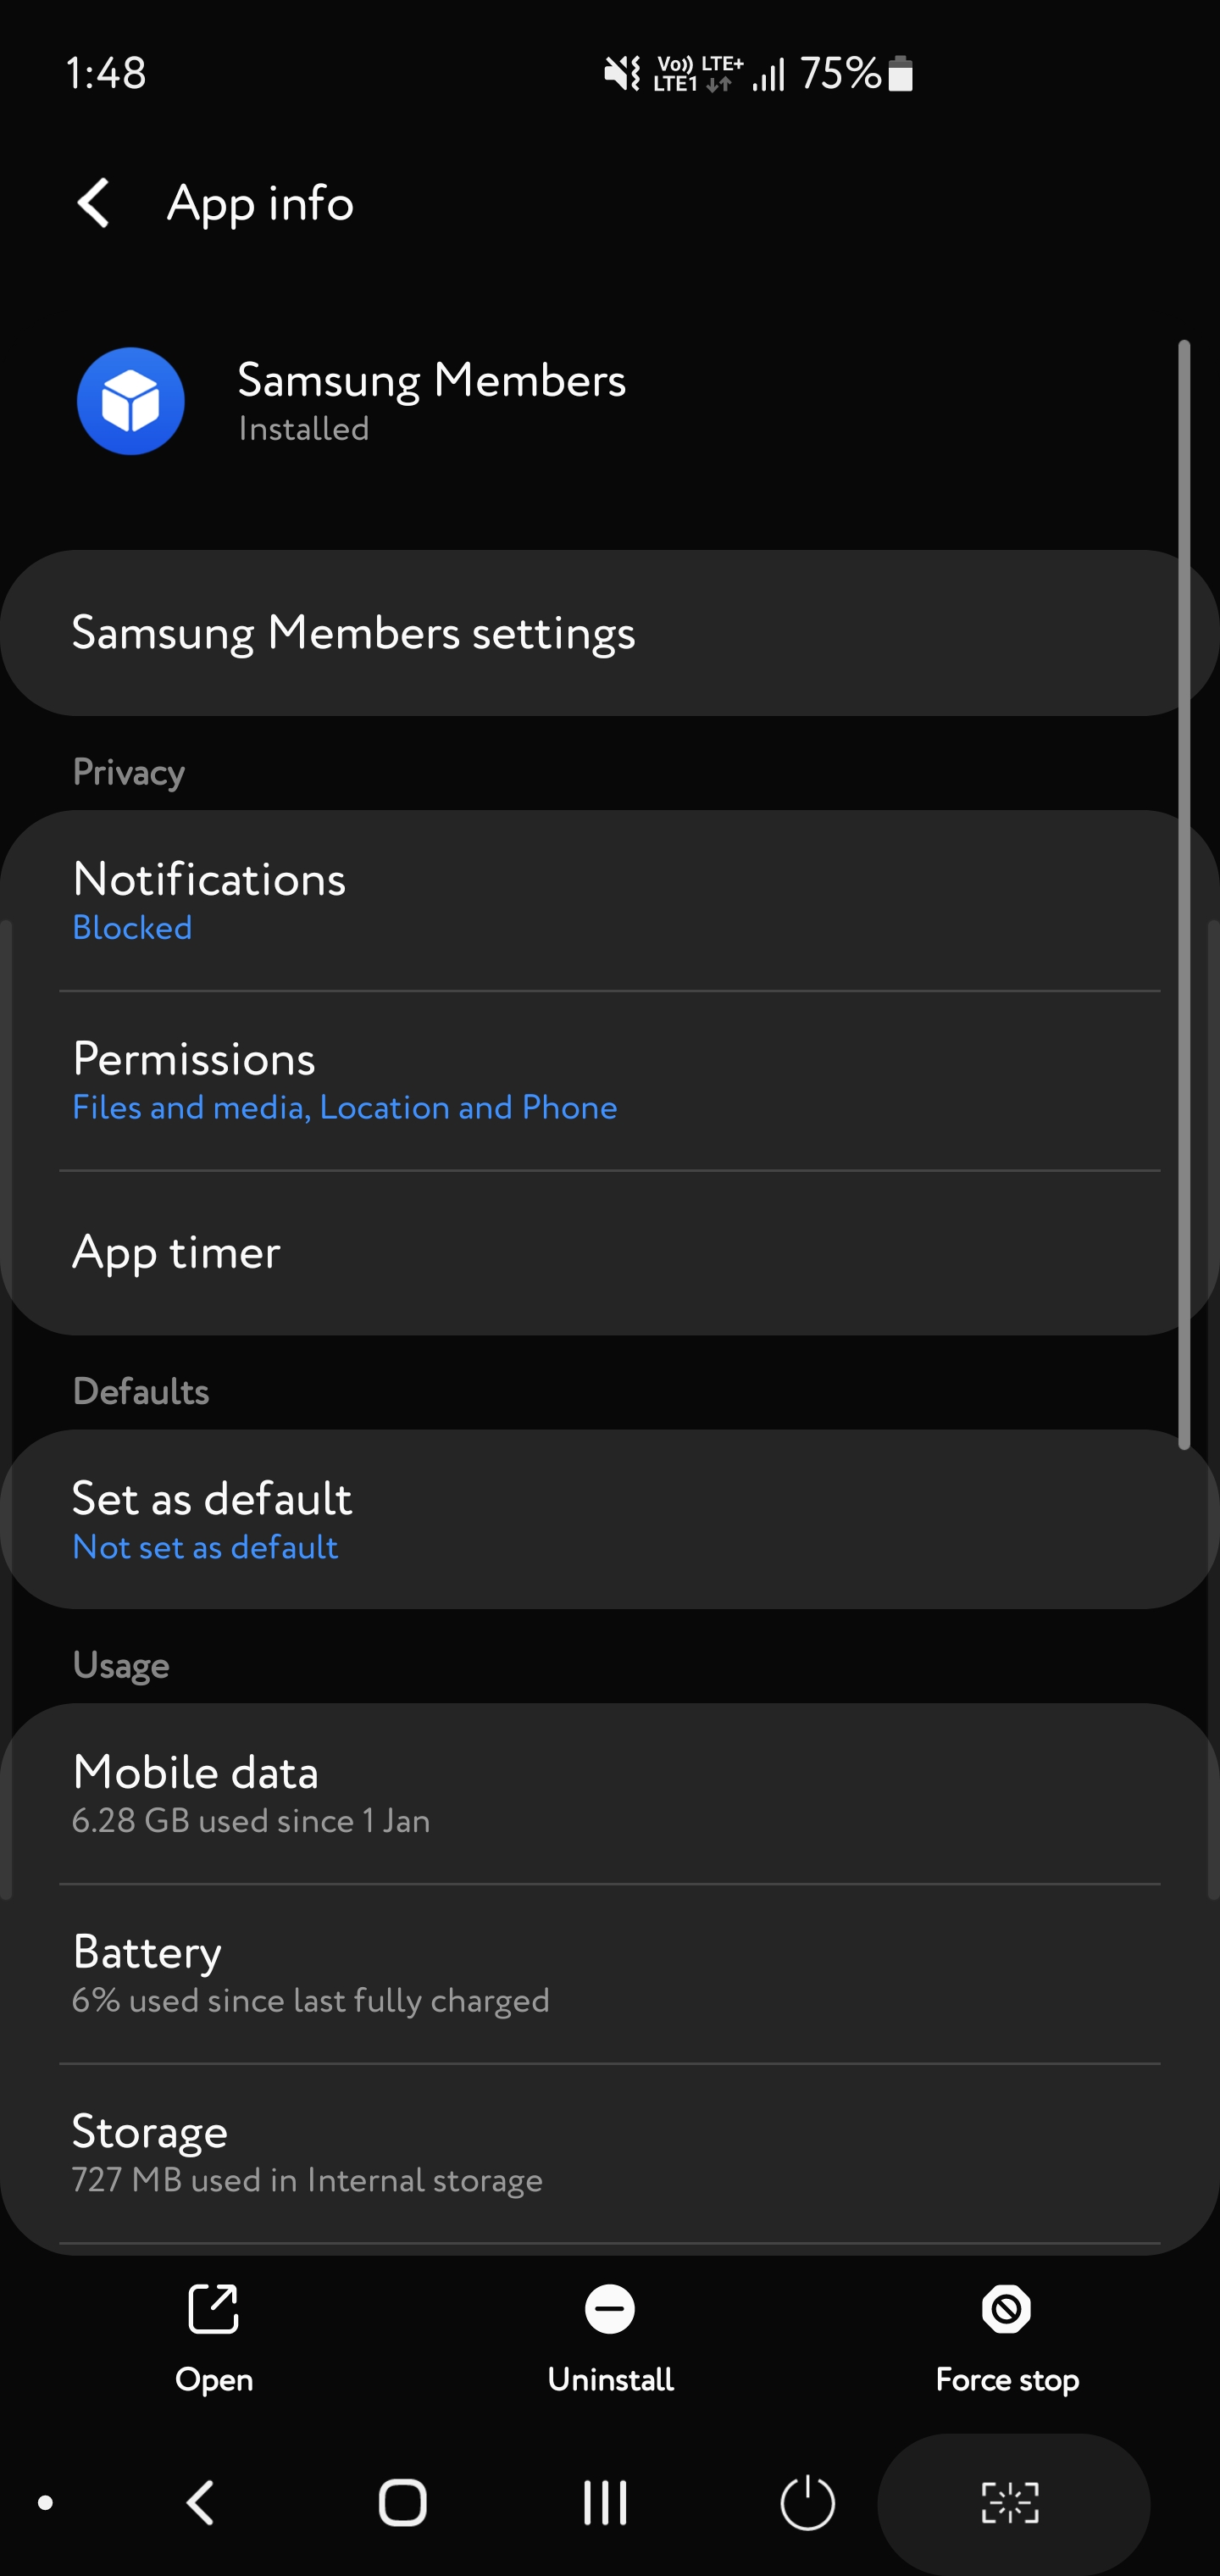 Solved: how to restrict all apps background data usage - Samsung Members